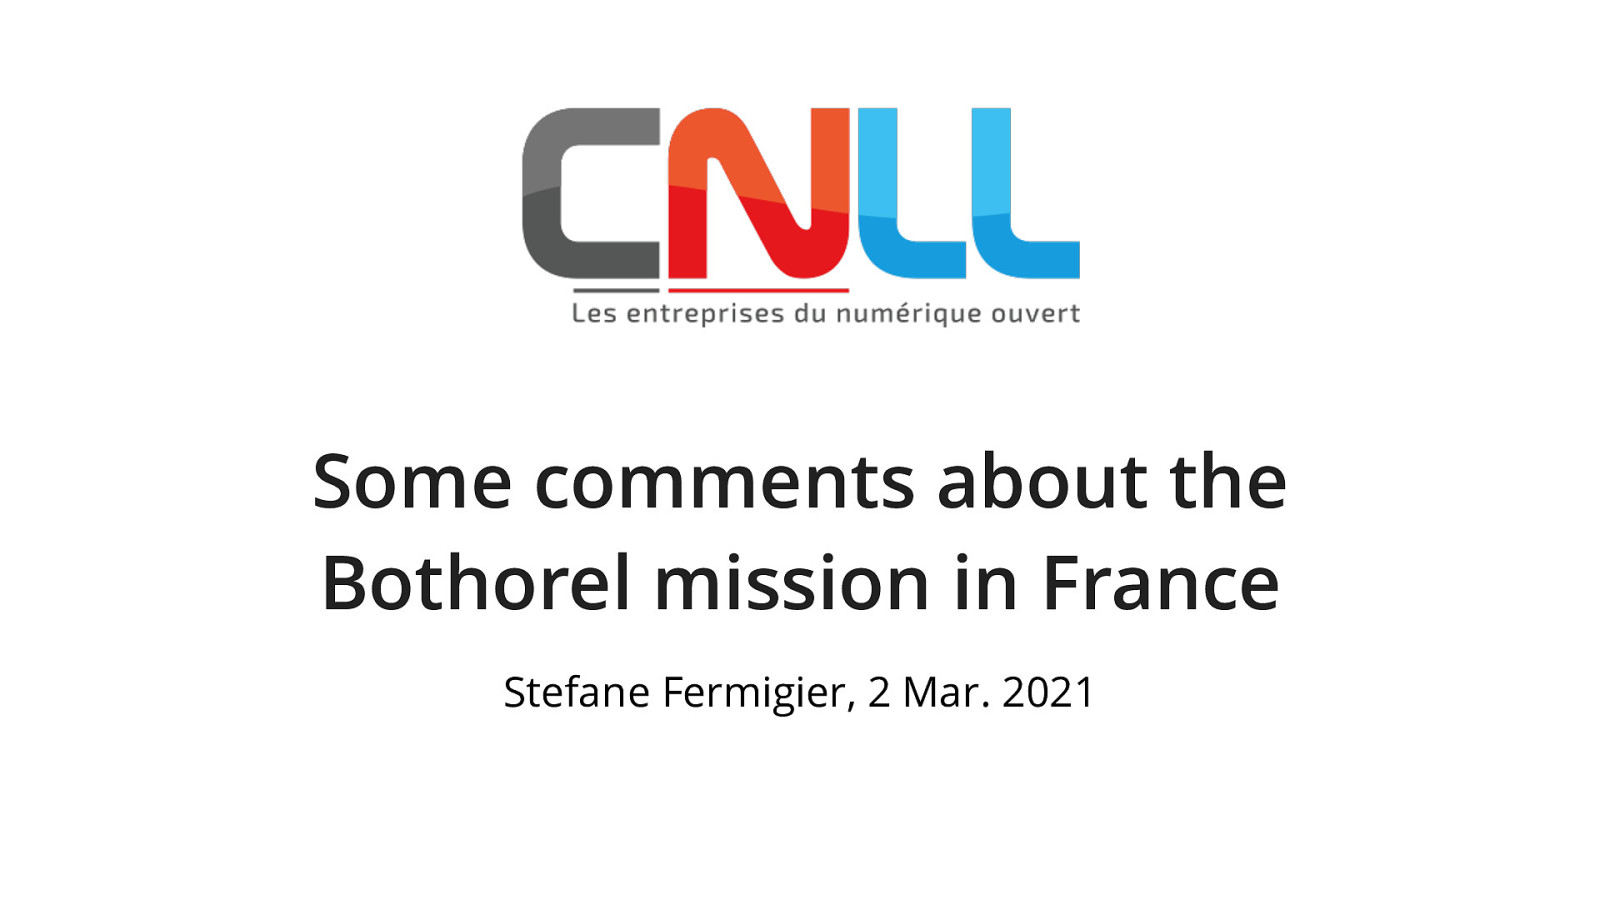 Some comments about the Bothorel mission in France